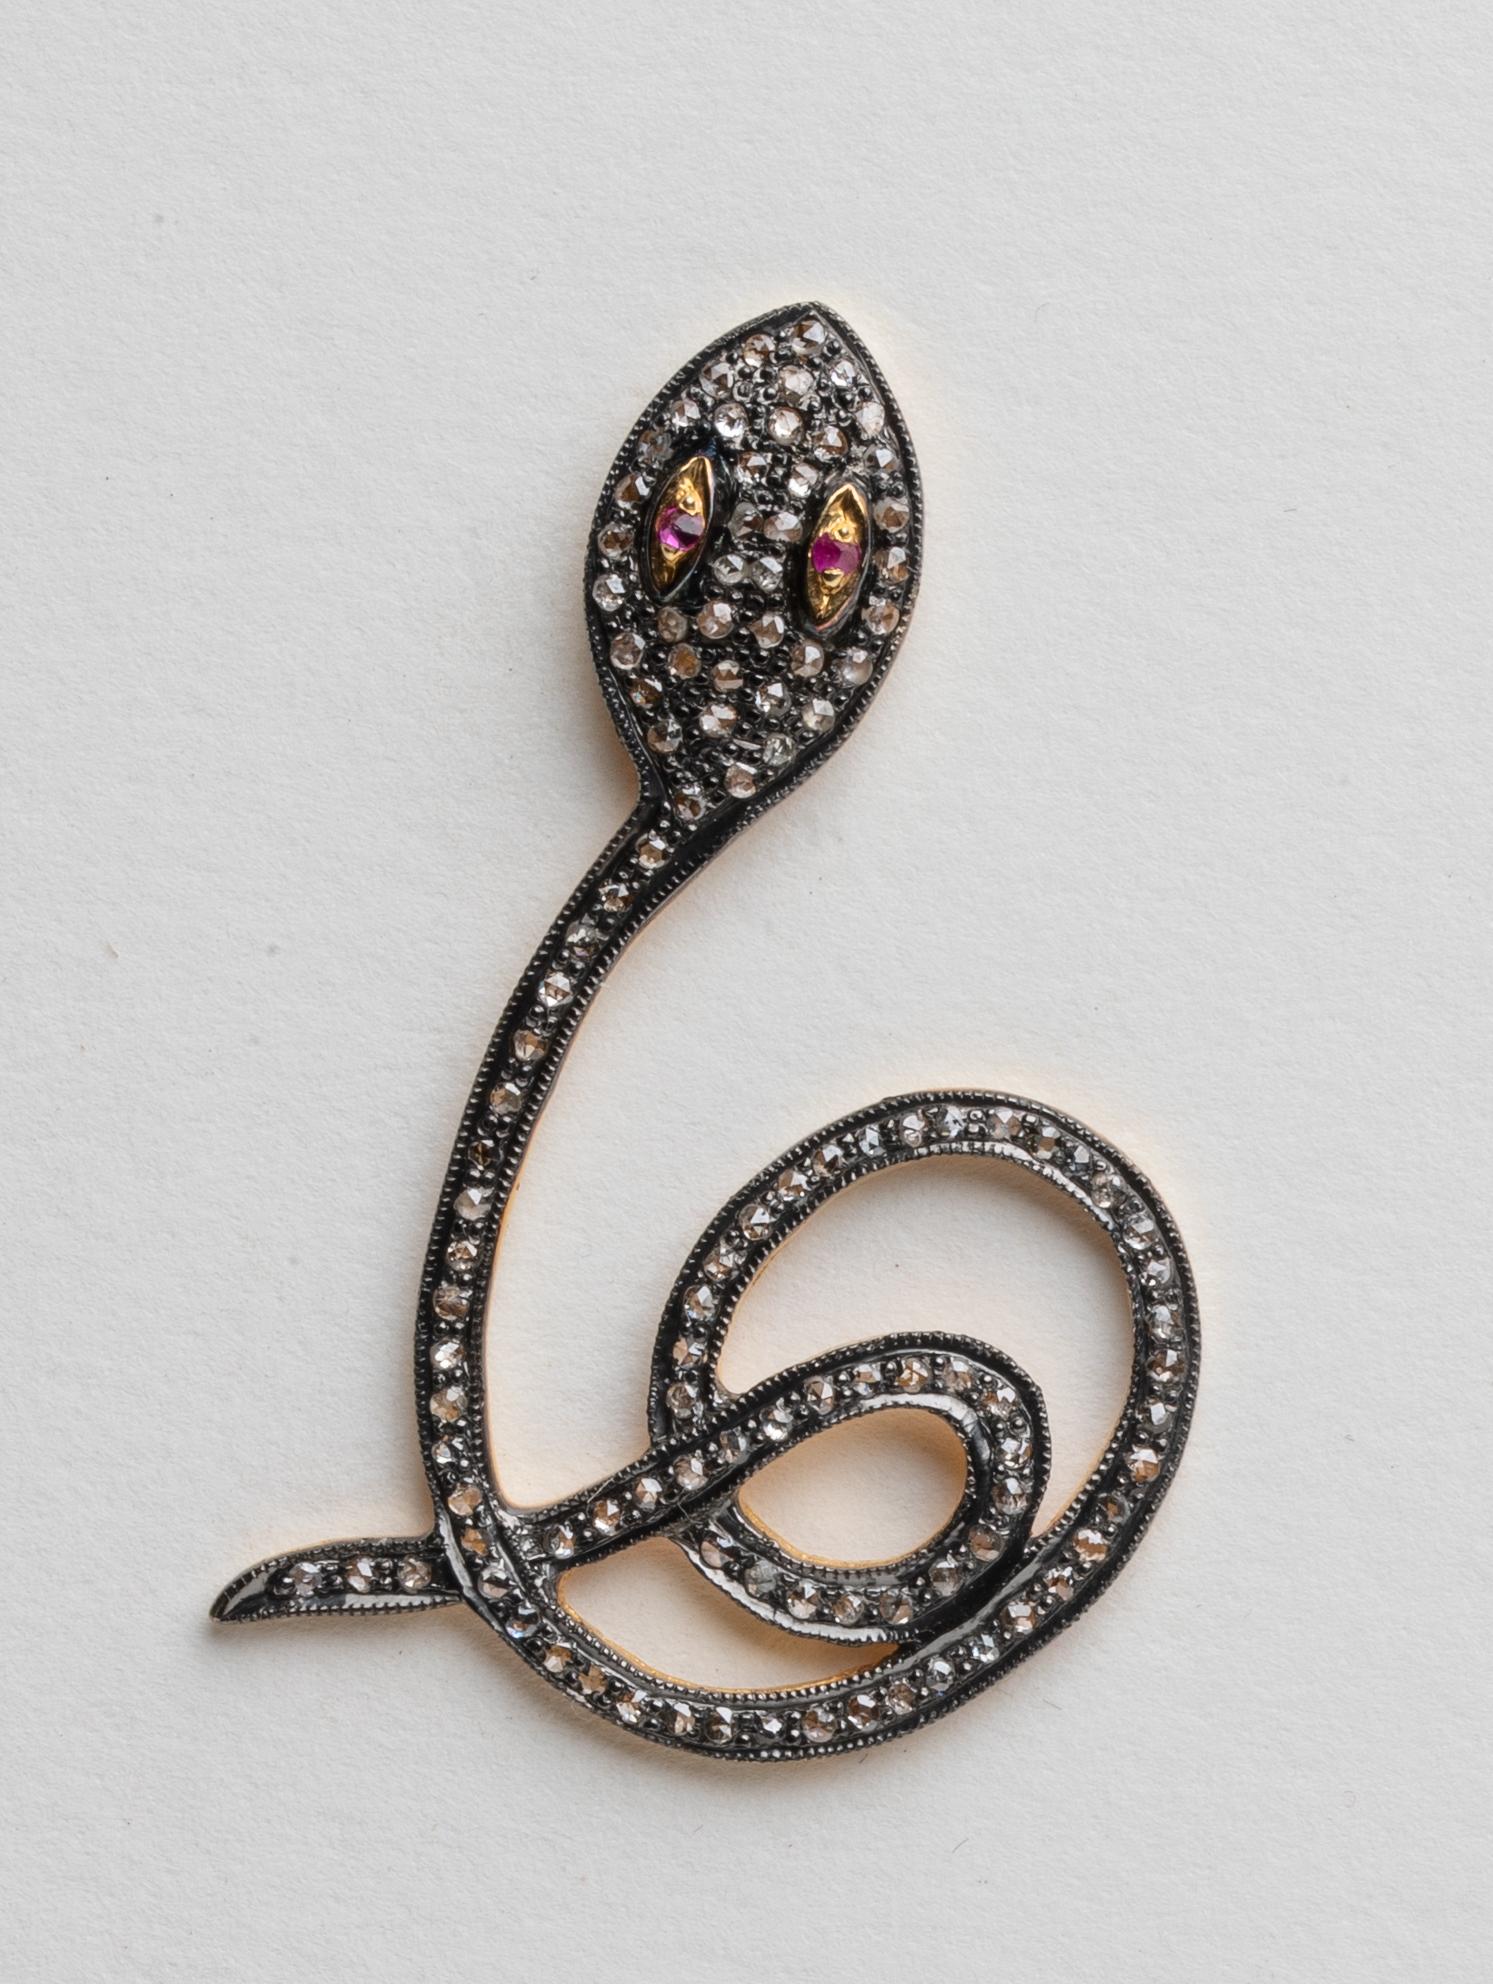 A pair of coiled snake earrings with round, brilliant cut diamonds set in rhodium plating with faceted ruby eyes.  18K gold post for pierced ears.  Total weight of diamonds is 1.43 carats.